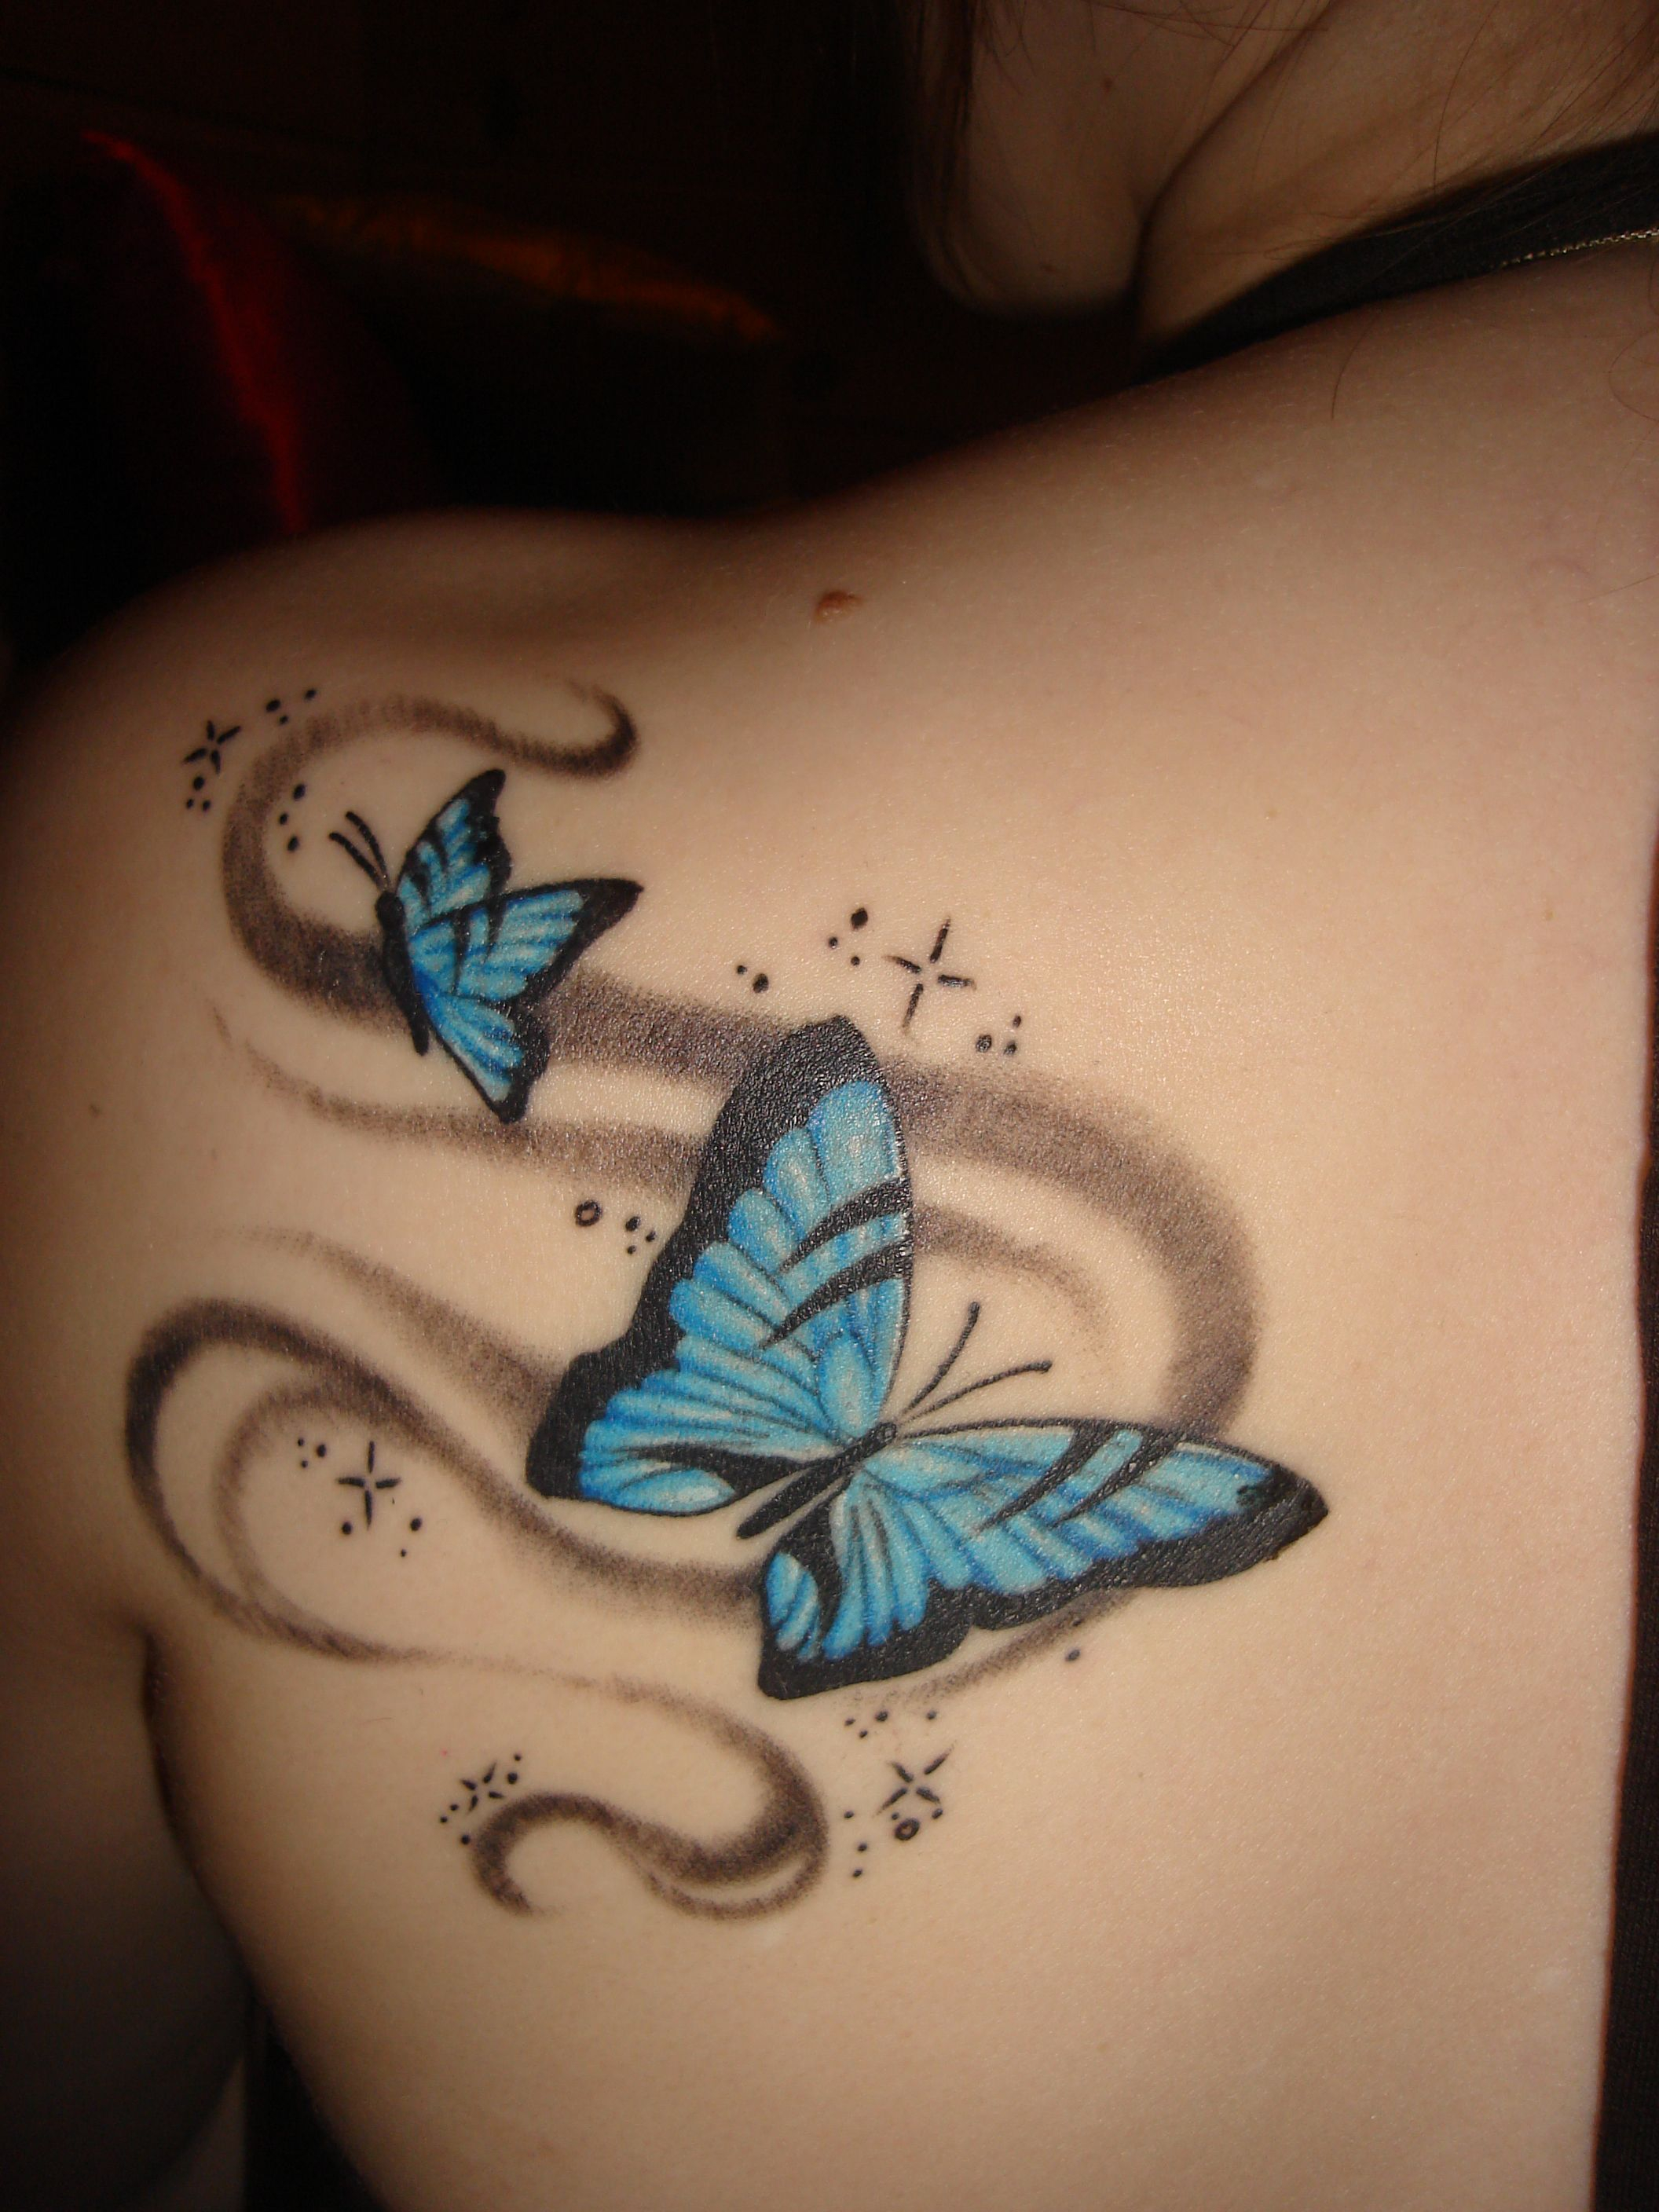 Butterfly Tattoo Meanings And Design Ideas Tattoos And Piercings regarding measurements 2112 X 2816